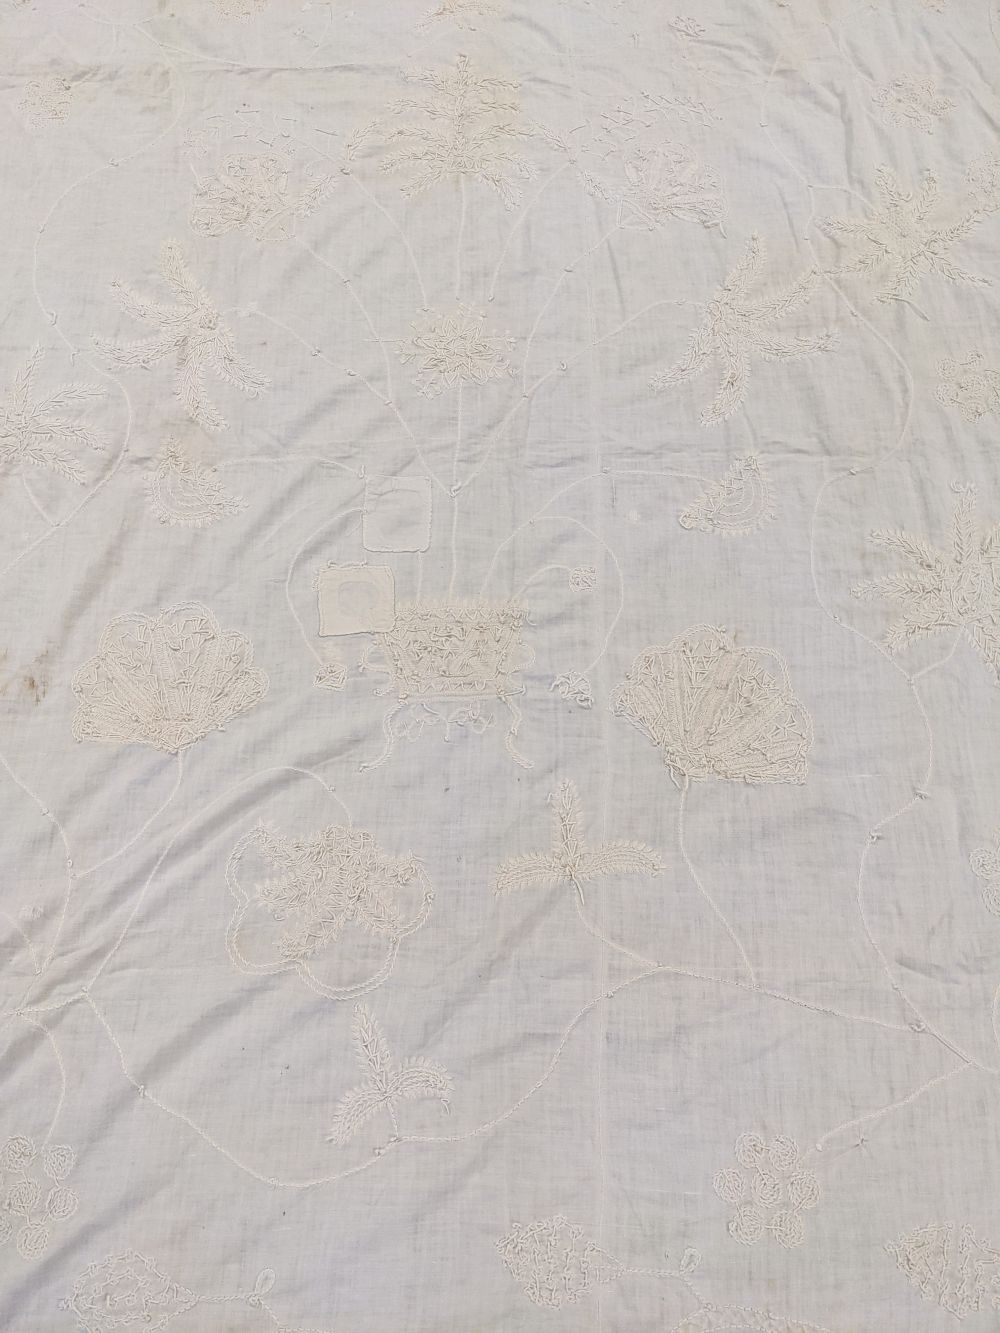 * Embroidered bedcover. A bullion-work coverlet, English, early 19th century - Image 6 of 16